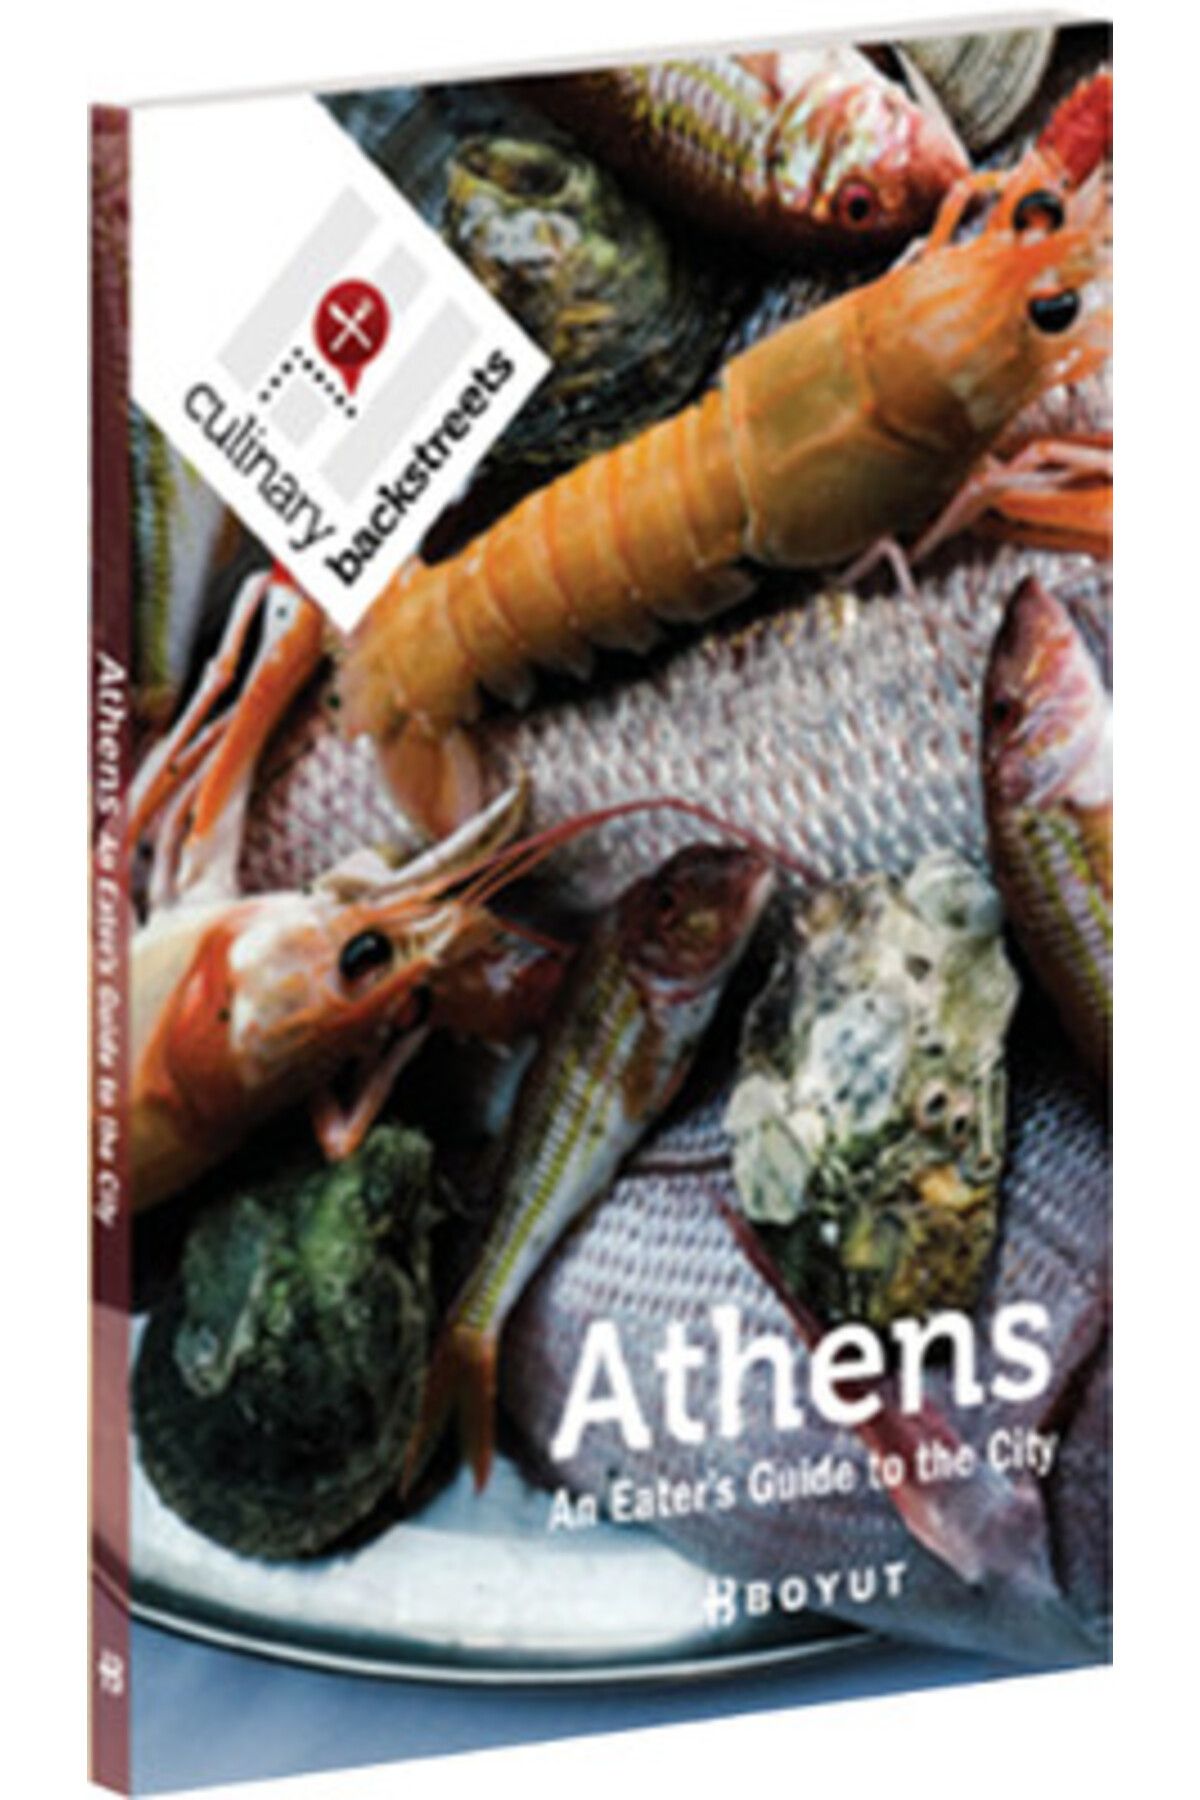 BOYUT YAYINLARI Athens An Eater's Guide to the City